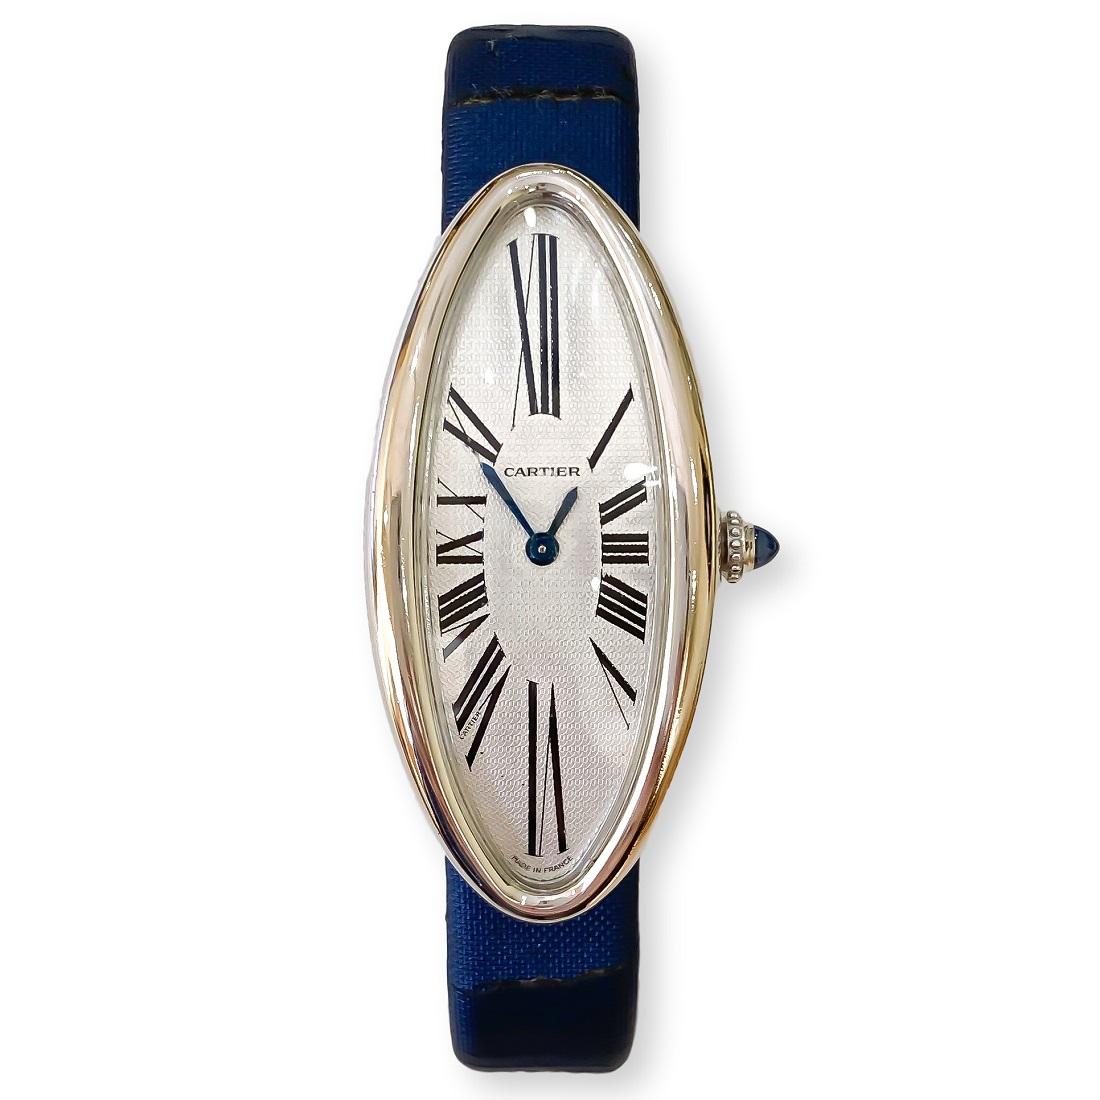 Rare Cartier timepiece designed in solid 18 karat white gold. Baignoire Allongee is a discontinued model, very hard to find. It is in excellent condition with some wear on the satin leather strap. The strap can be ordered/replaced at a Cartier